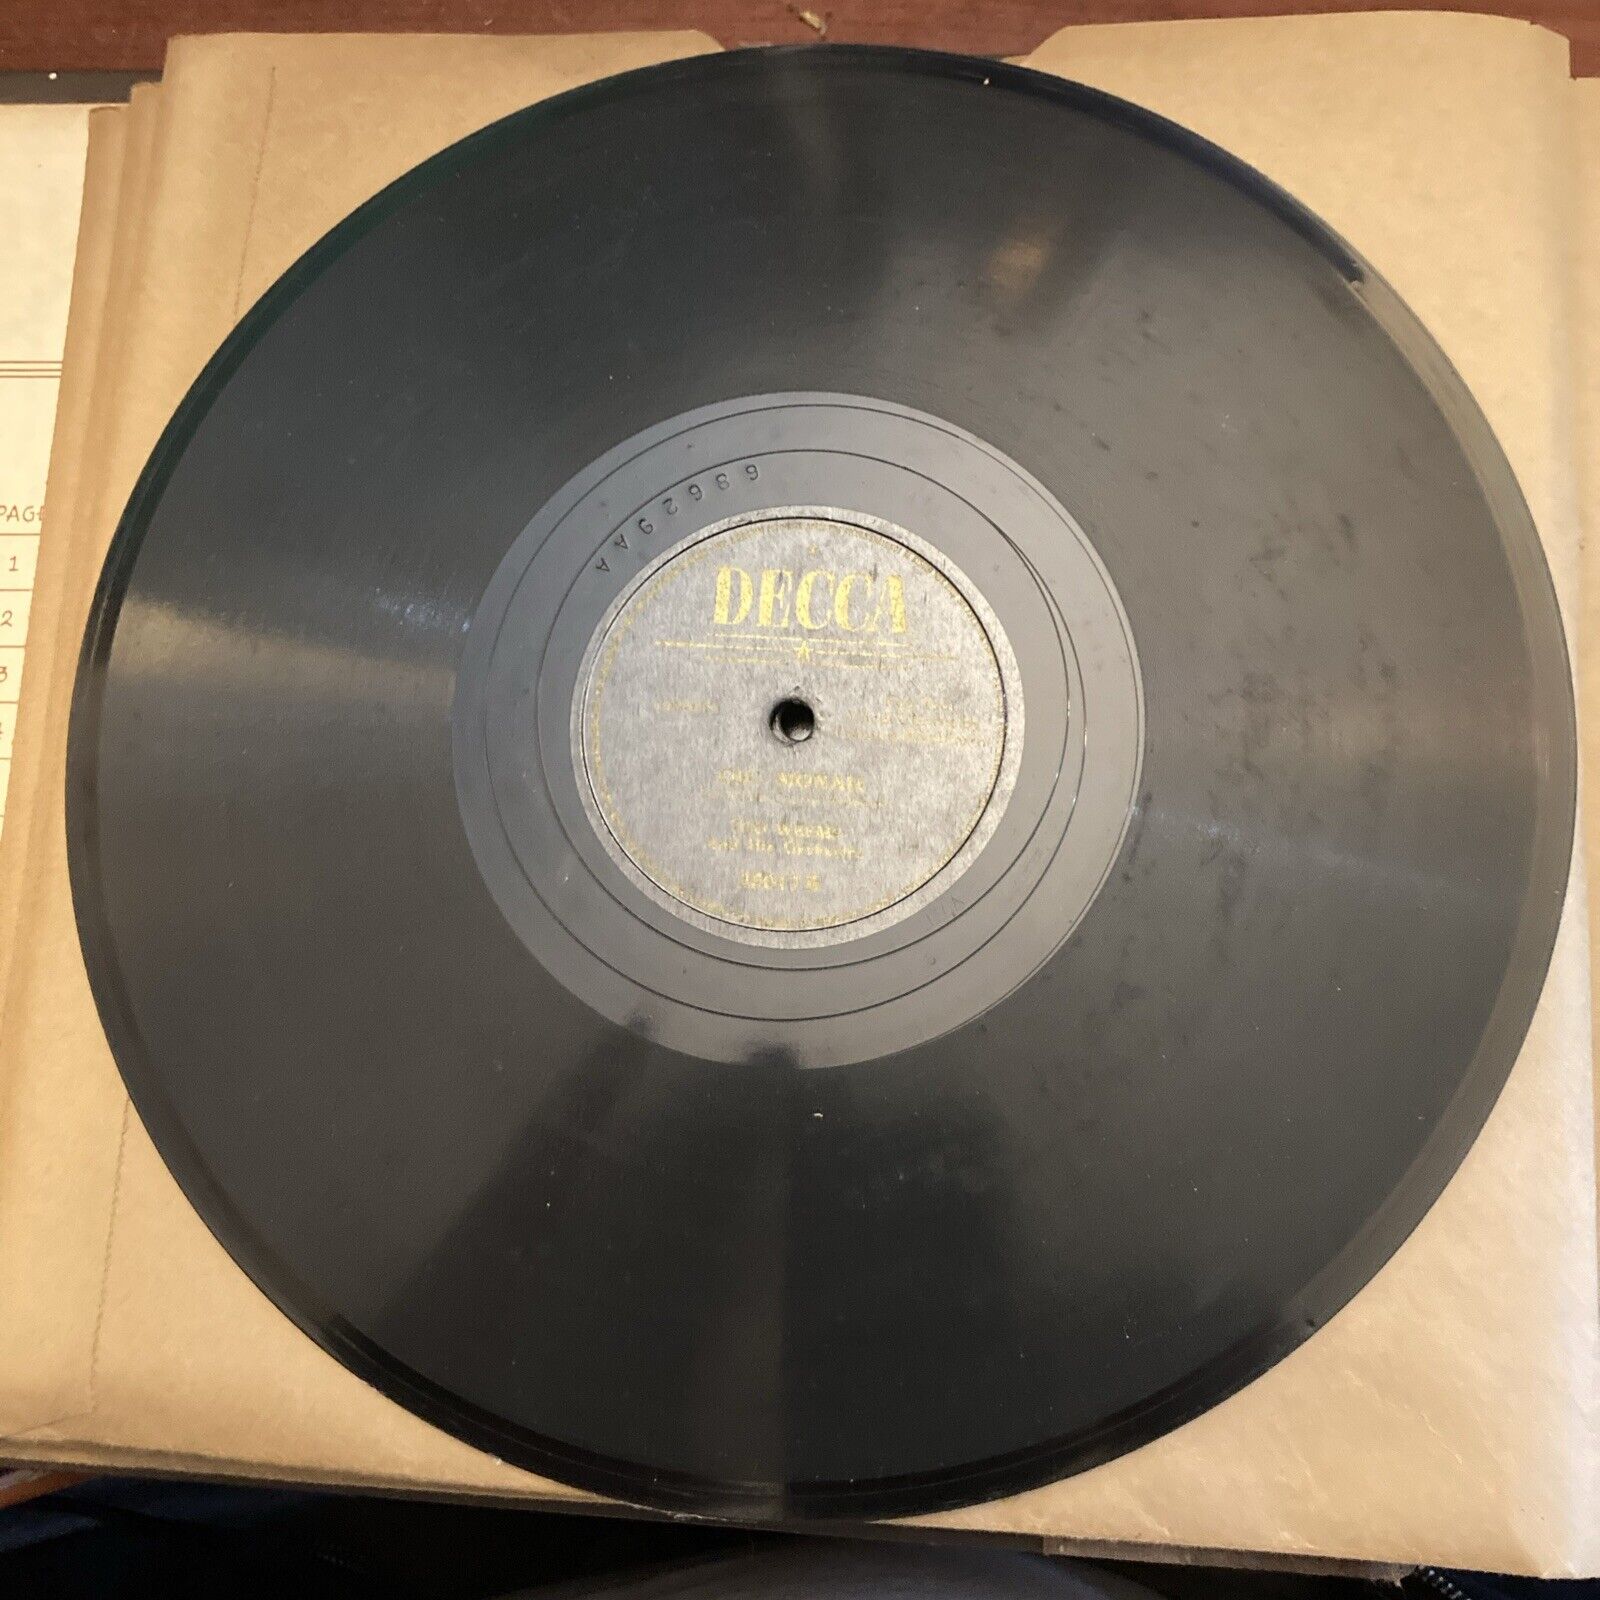 Ted Weems - Heartaches / Oh Monah - Decca #25017 - 10” 78 RPM